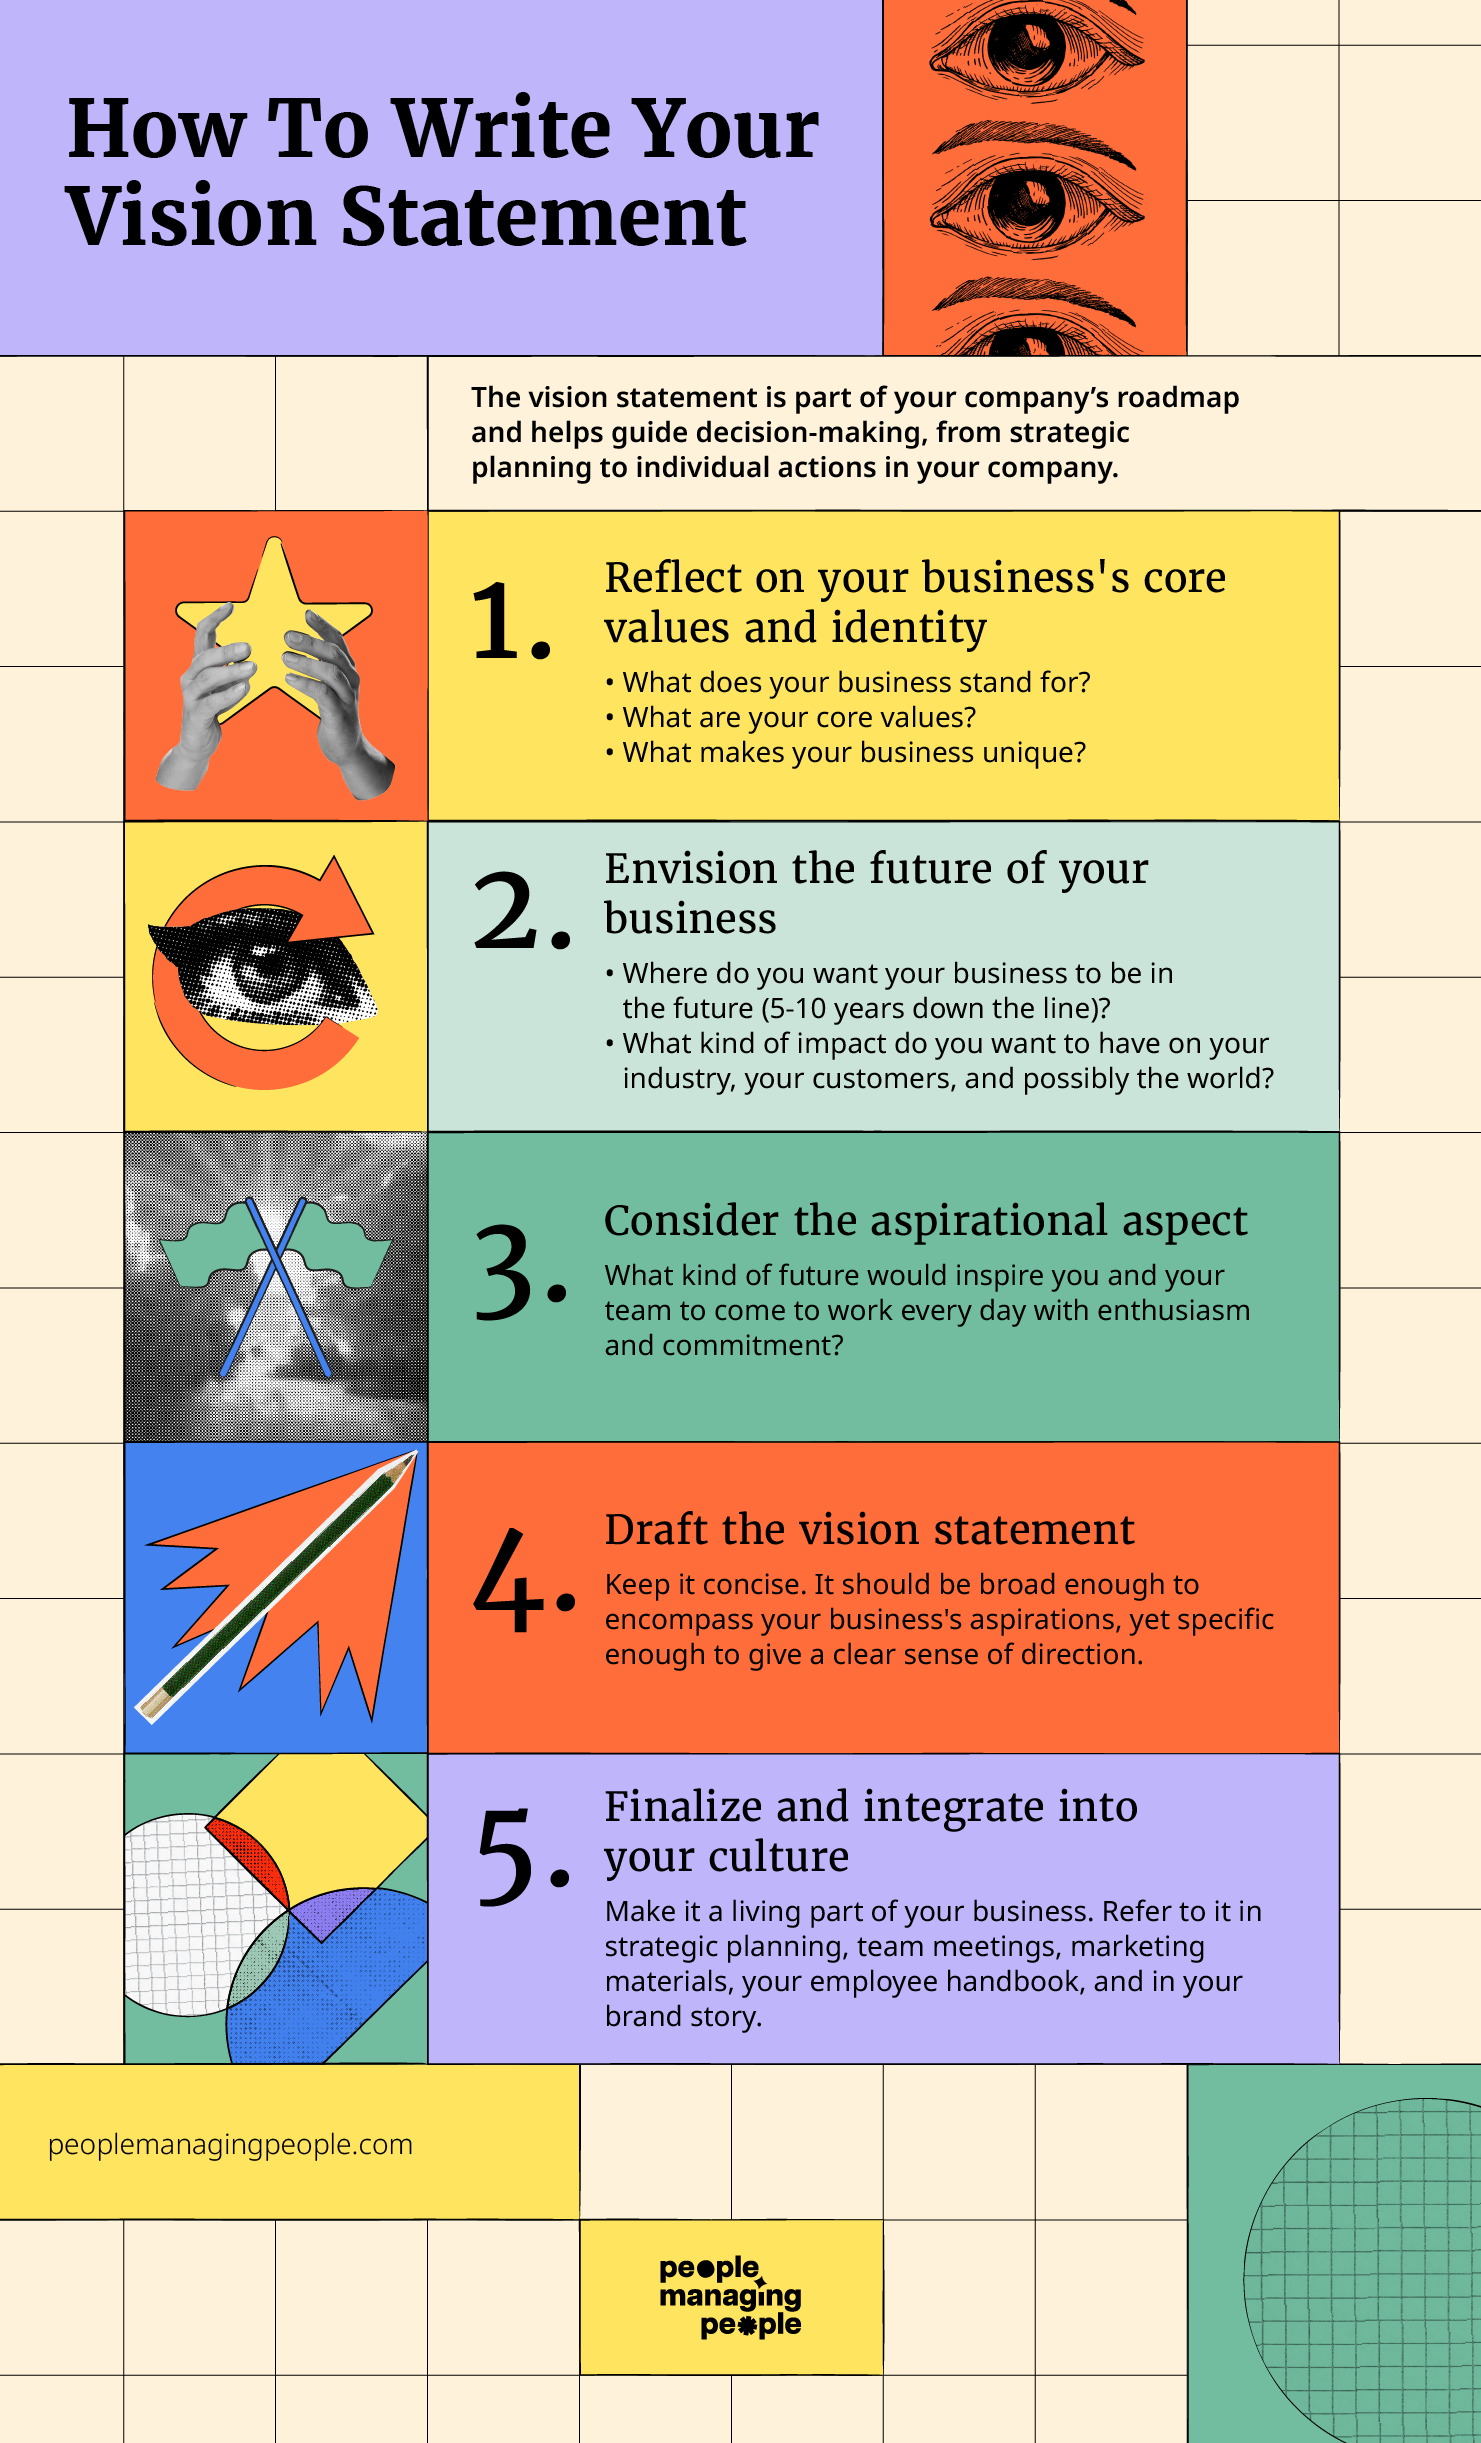 Infographic providing step-by-step instructions to help you write your vision statement. 